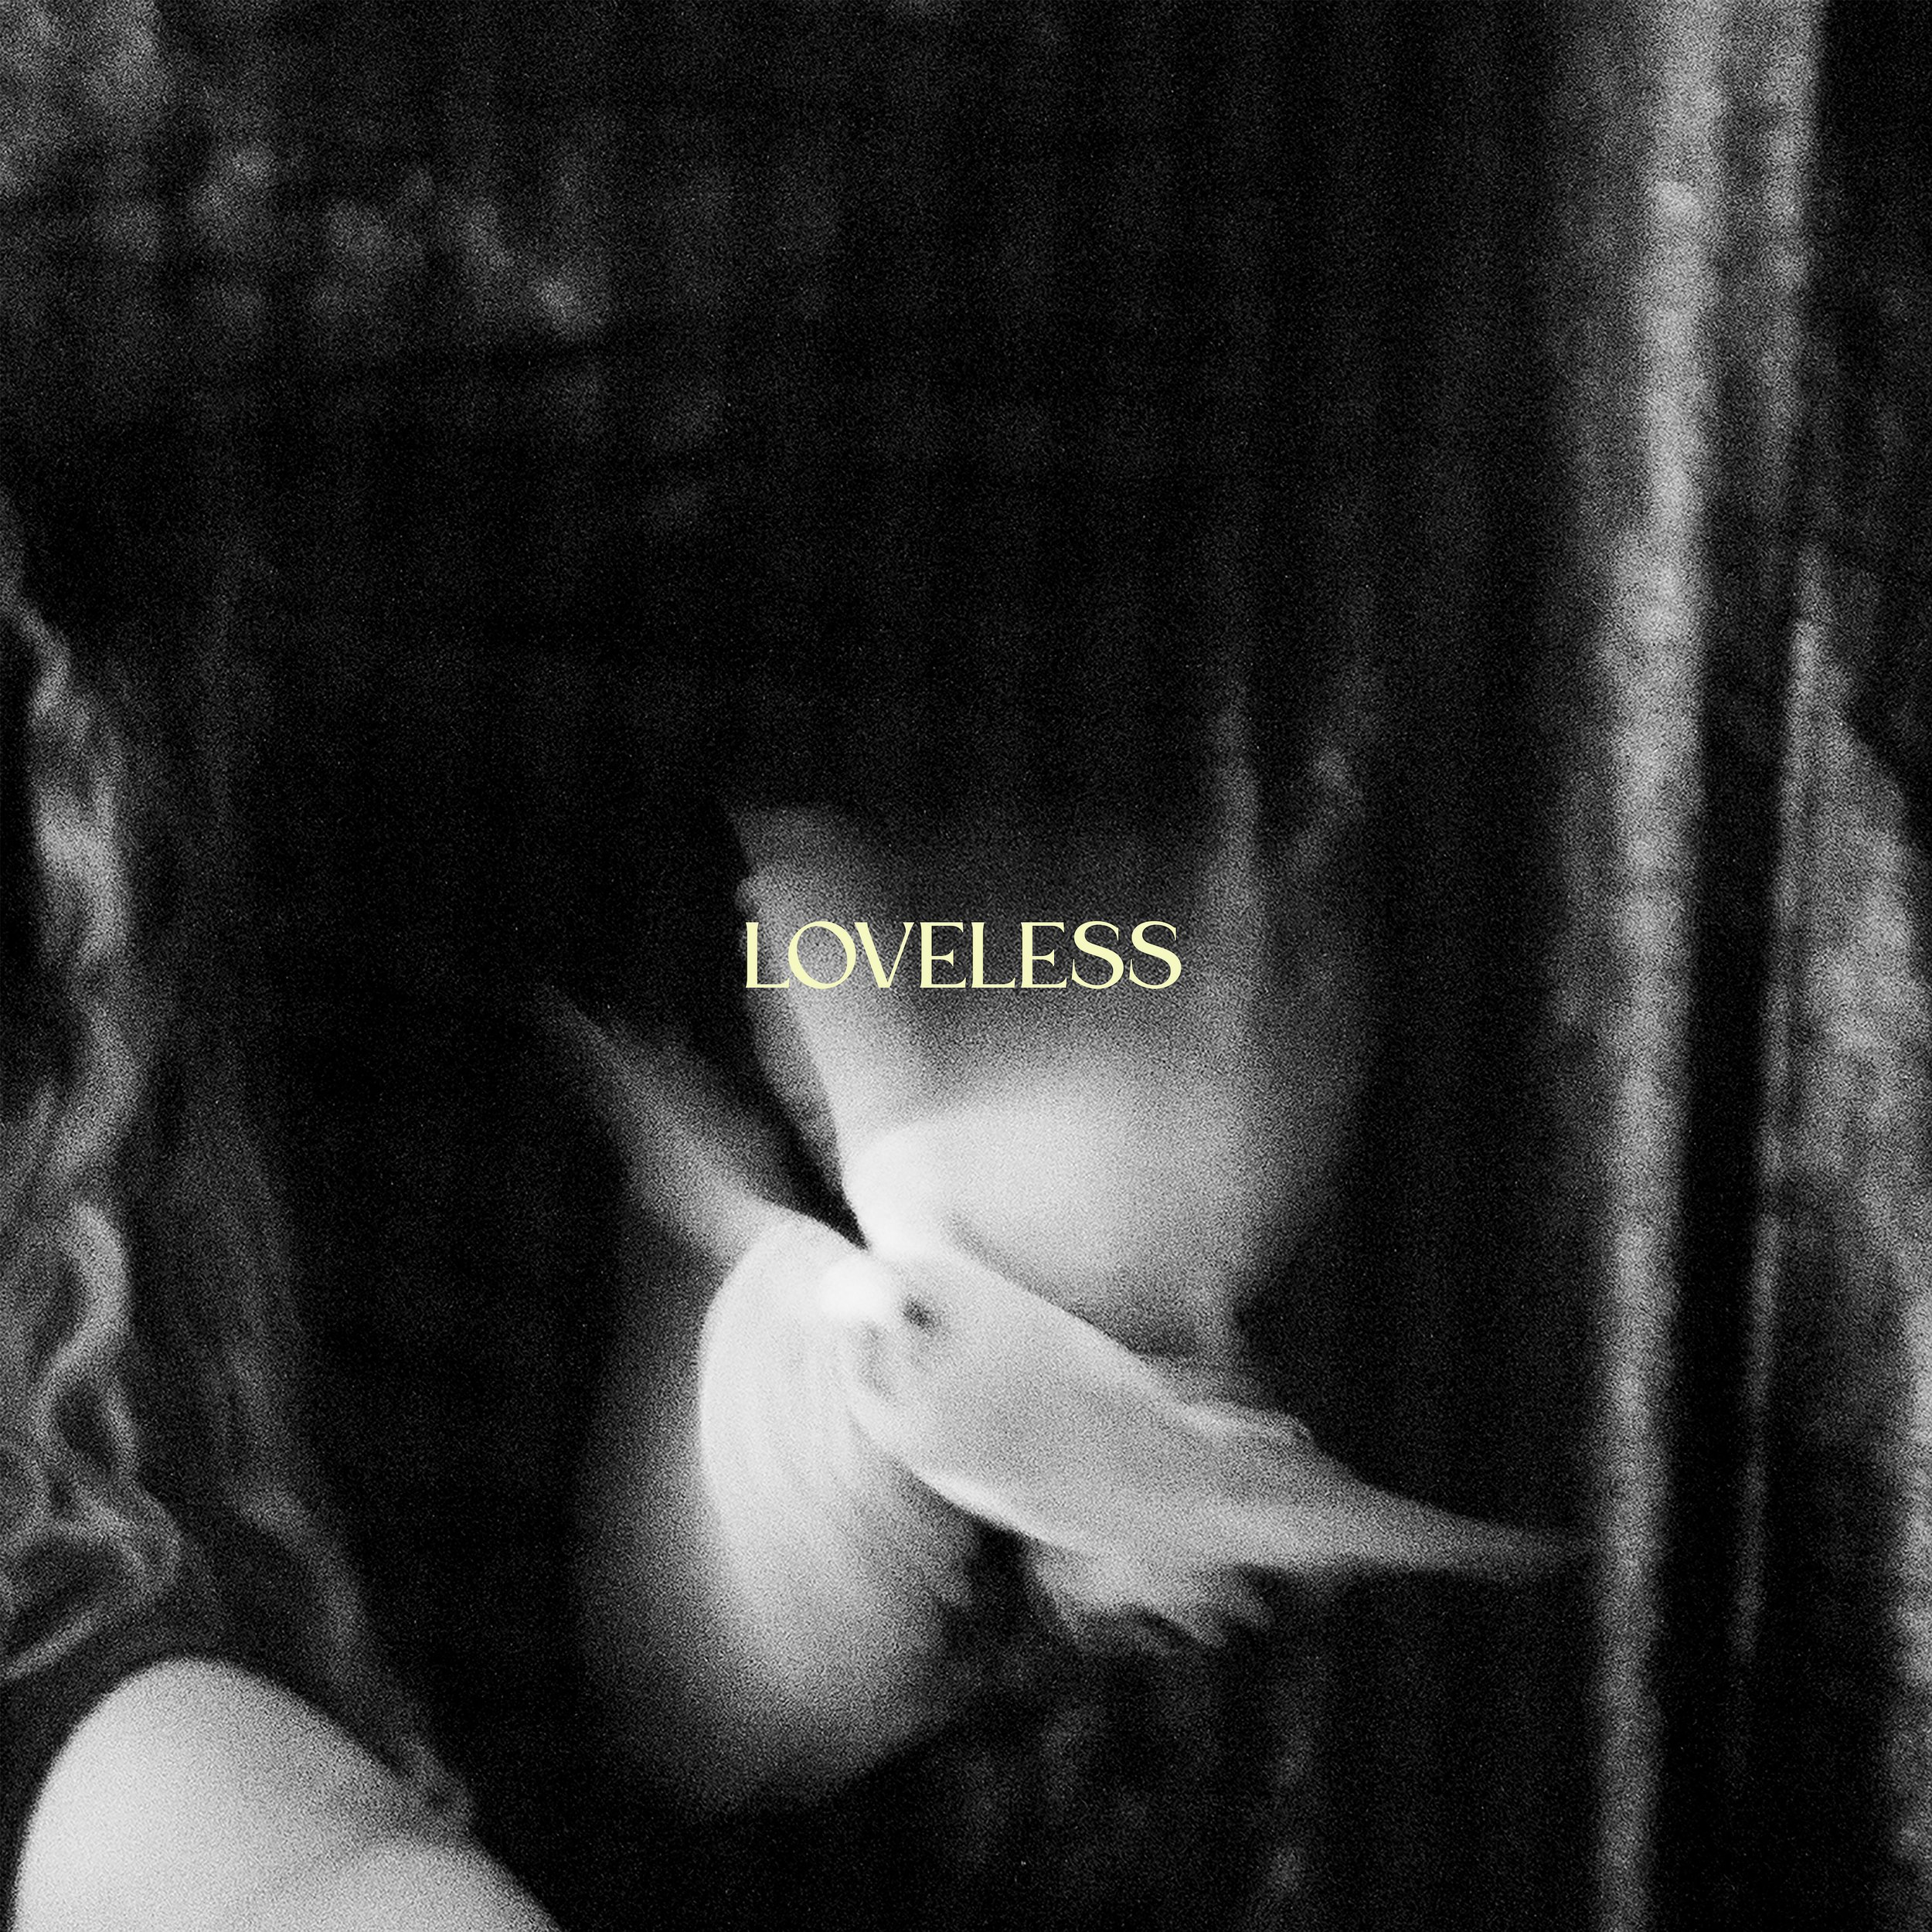 Zilched - Loveless – $1.00